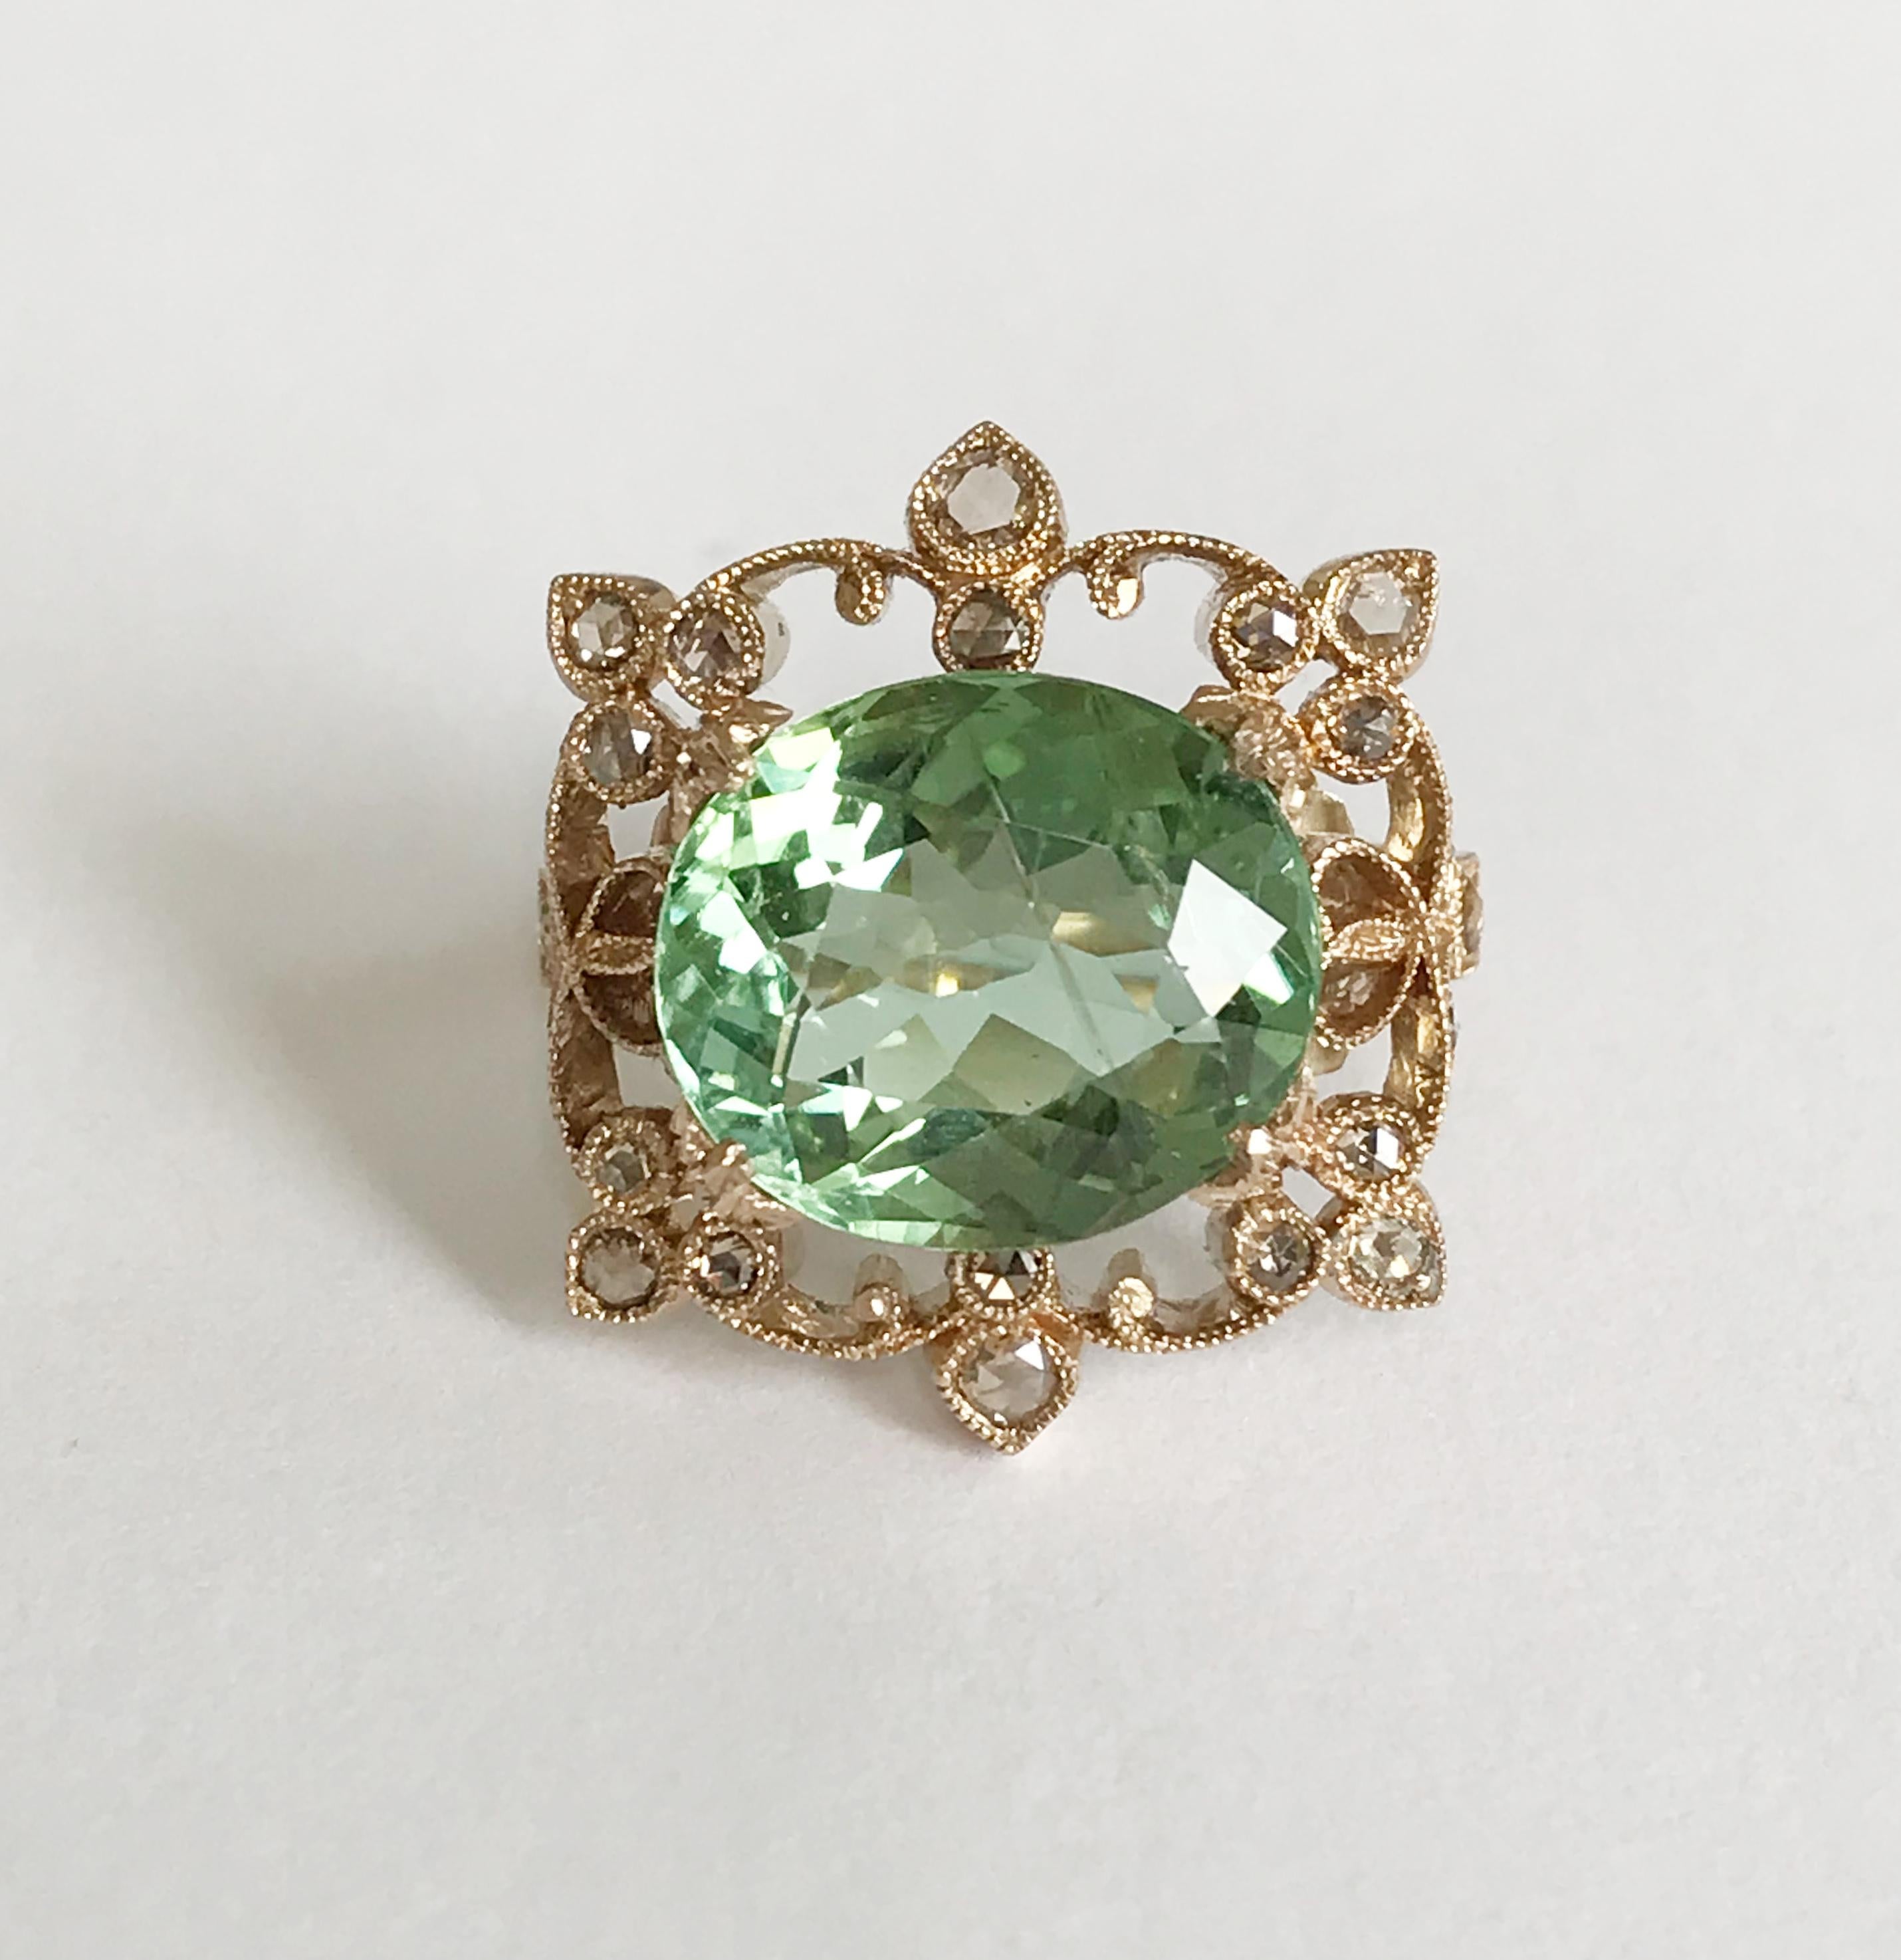 Dalben design Green Tourmaline and brown Diamond Ring mounted in 18 kt warm white gold. One Oval cut Green Tourmaline weighting 6,98 carat and 22 rose cut brown Diamonds weighting 0,45 carats. Ring size 7 1/4 USA - 55 EU resizable to most finger